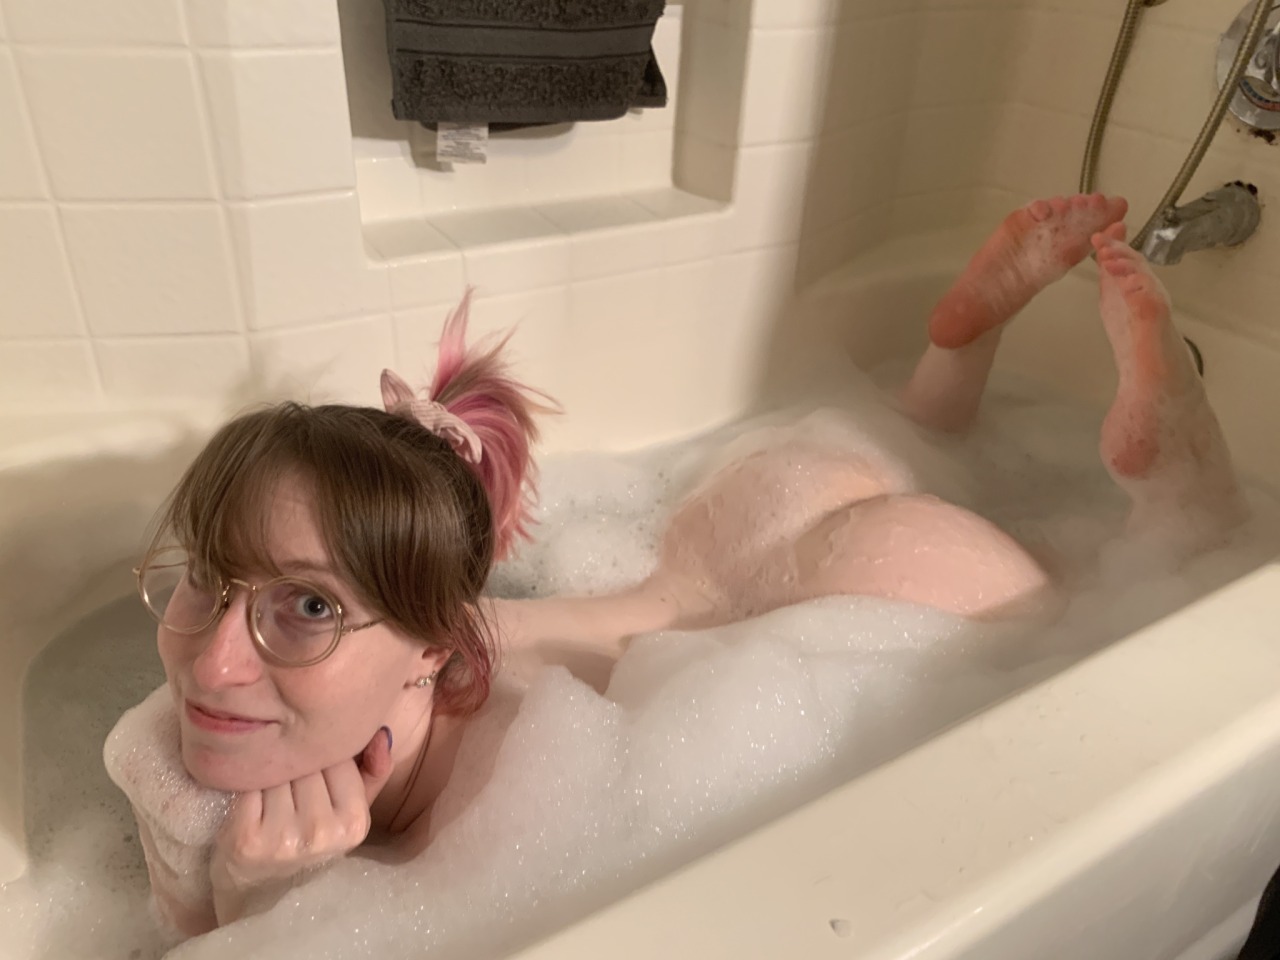 aine-sweetfyre:Bubble bath time! Too bad adult photos